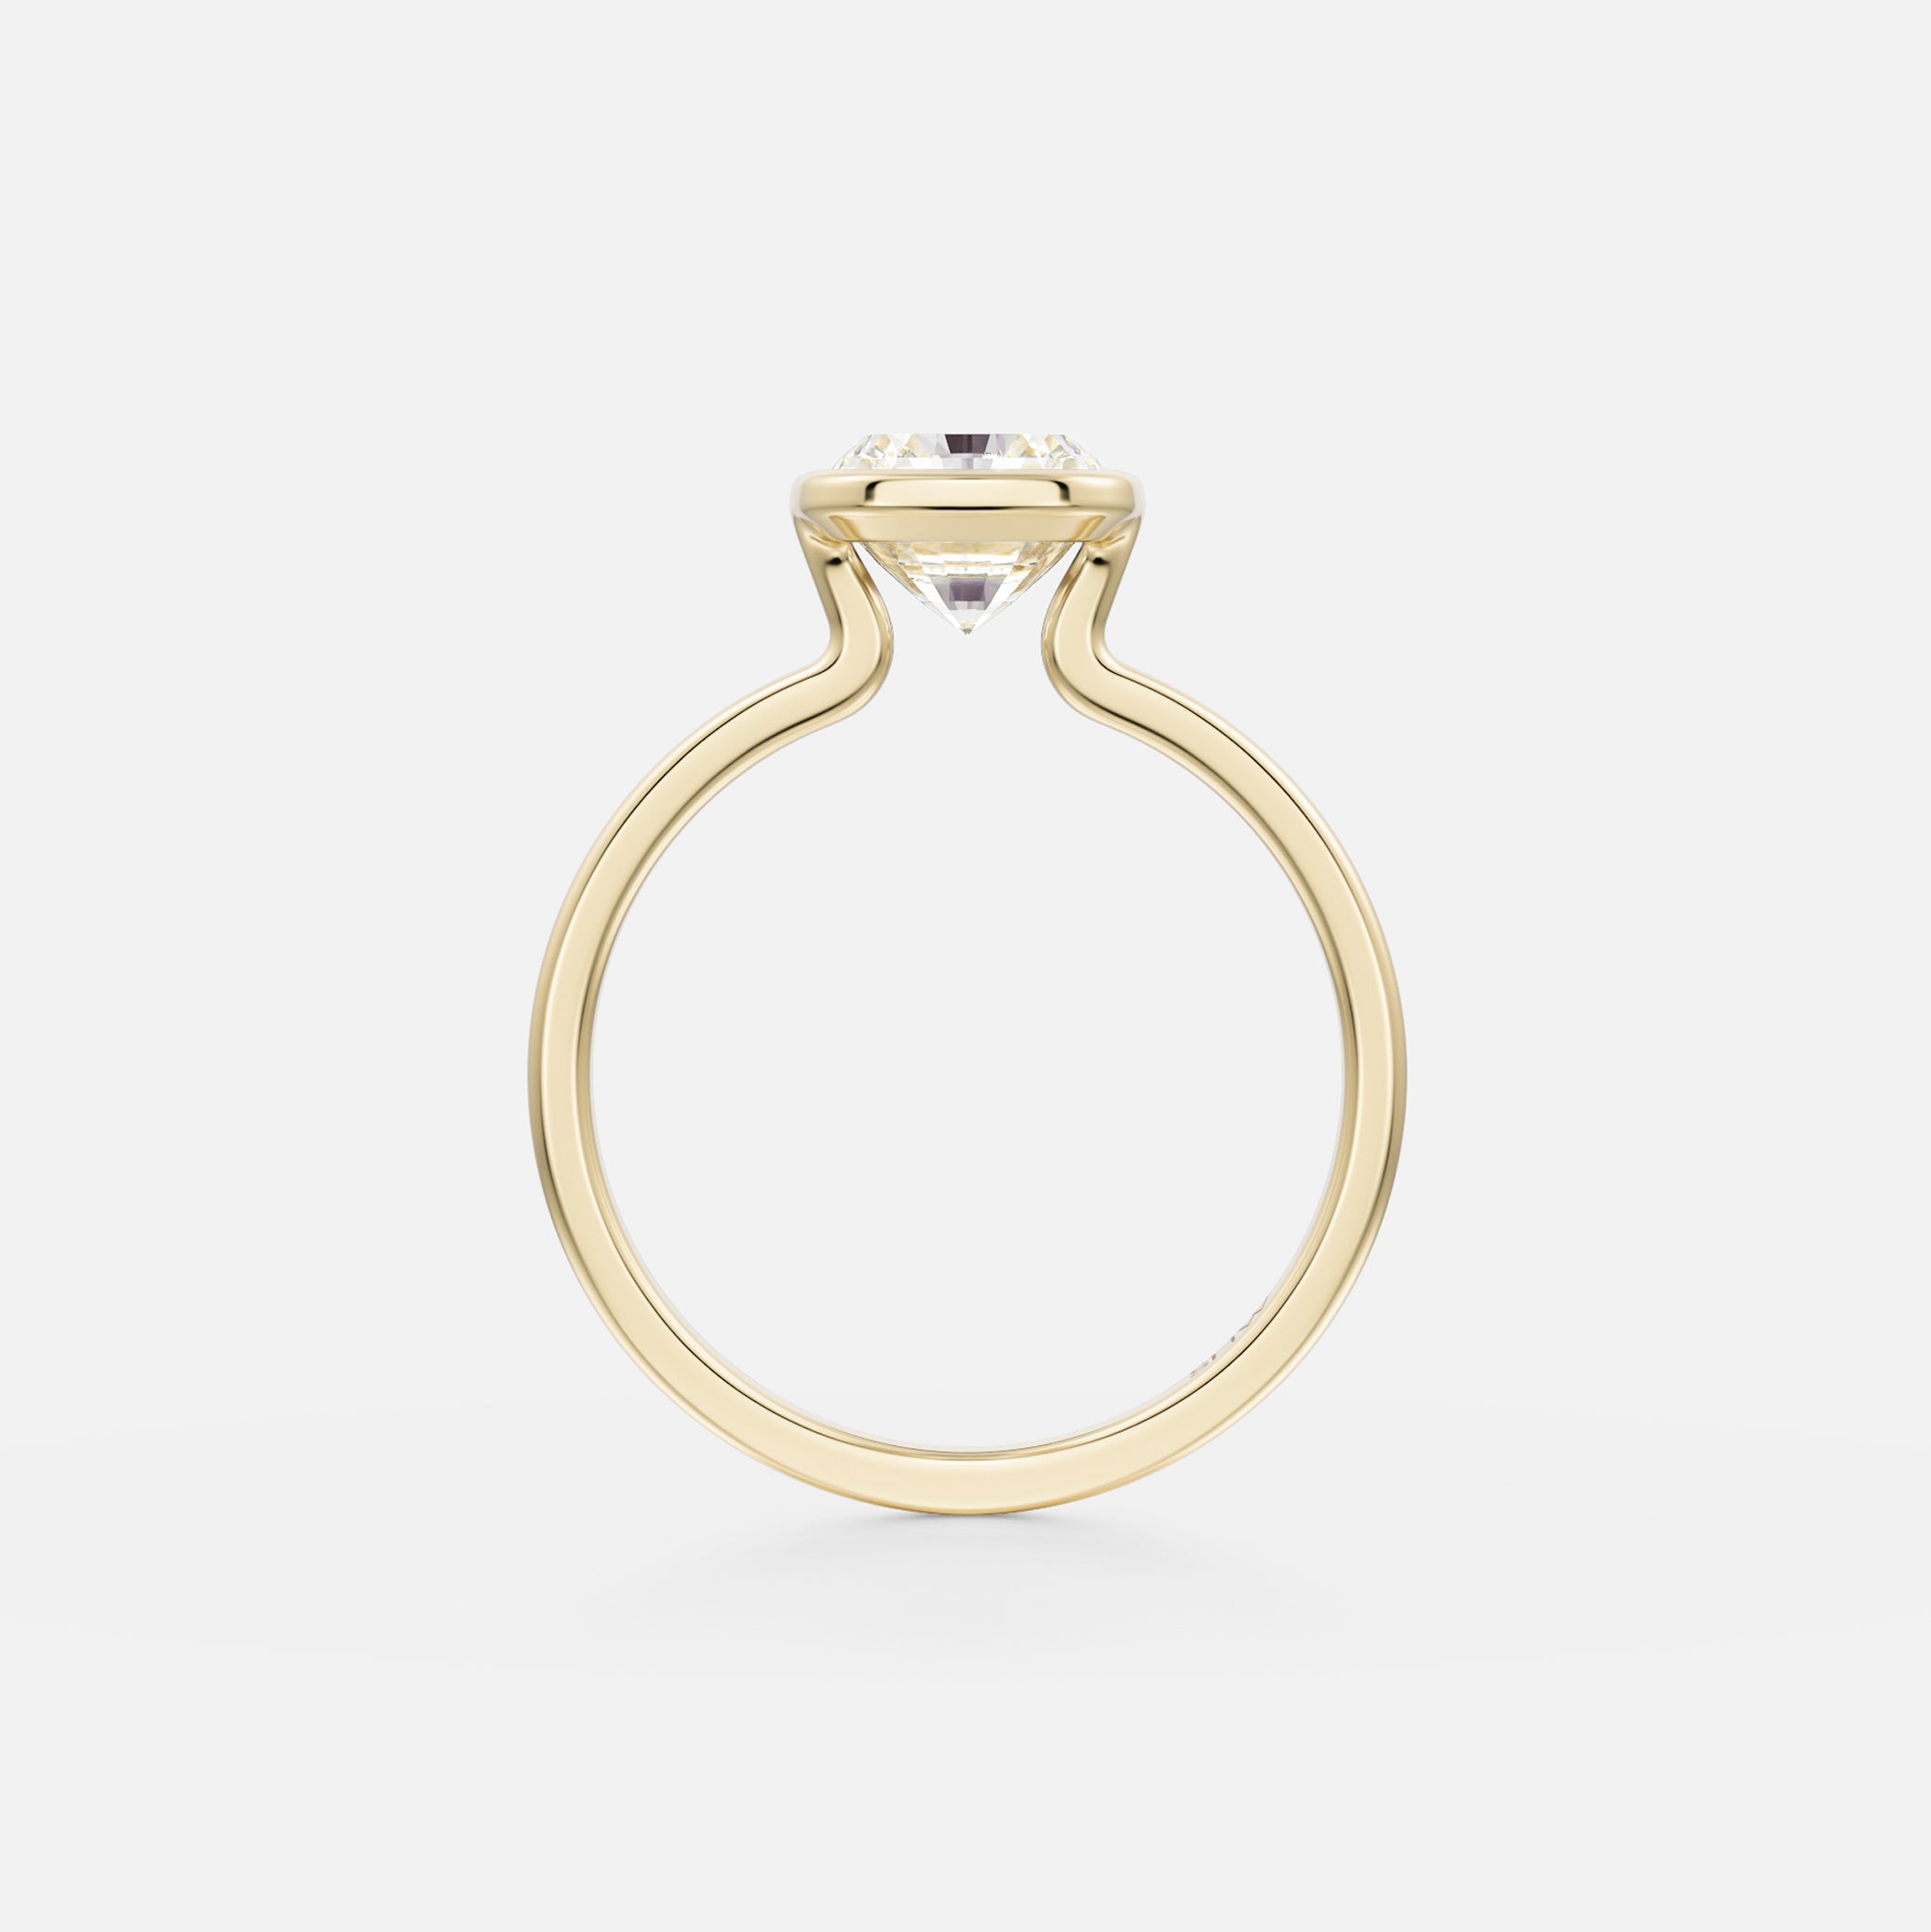 Mana thin square profile with Cushion Modern Engagement Ring Setting in 14ky Gold or platinum handmade by SHW Fine Jewelry NYC